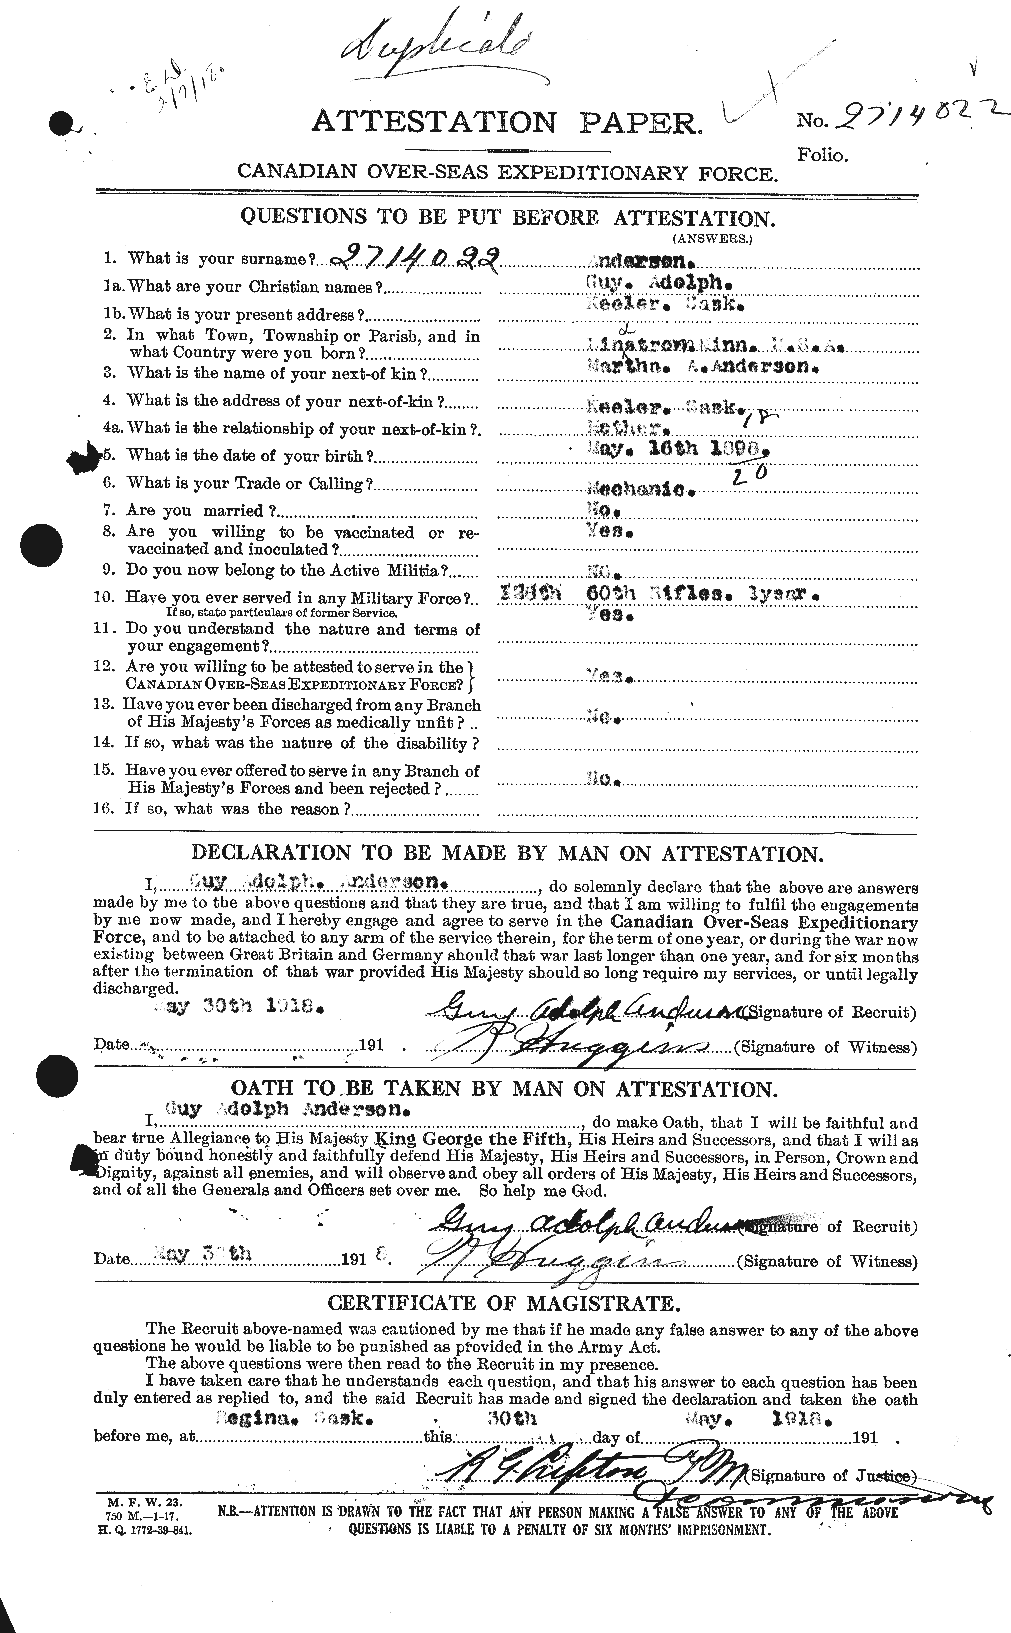 Personnel Records of the First World War - CEF 209641a